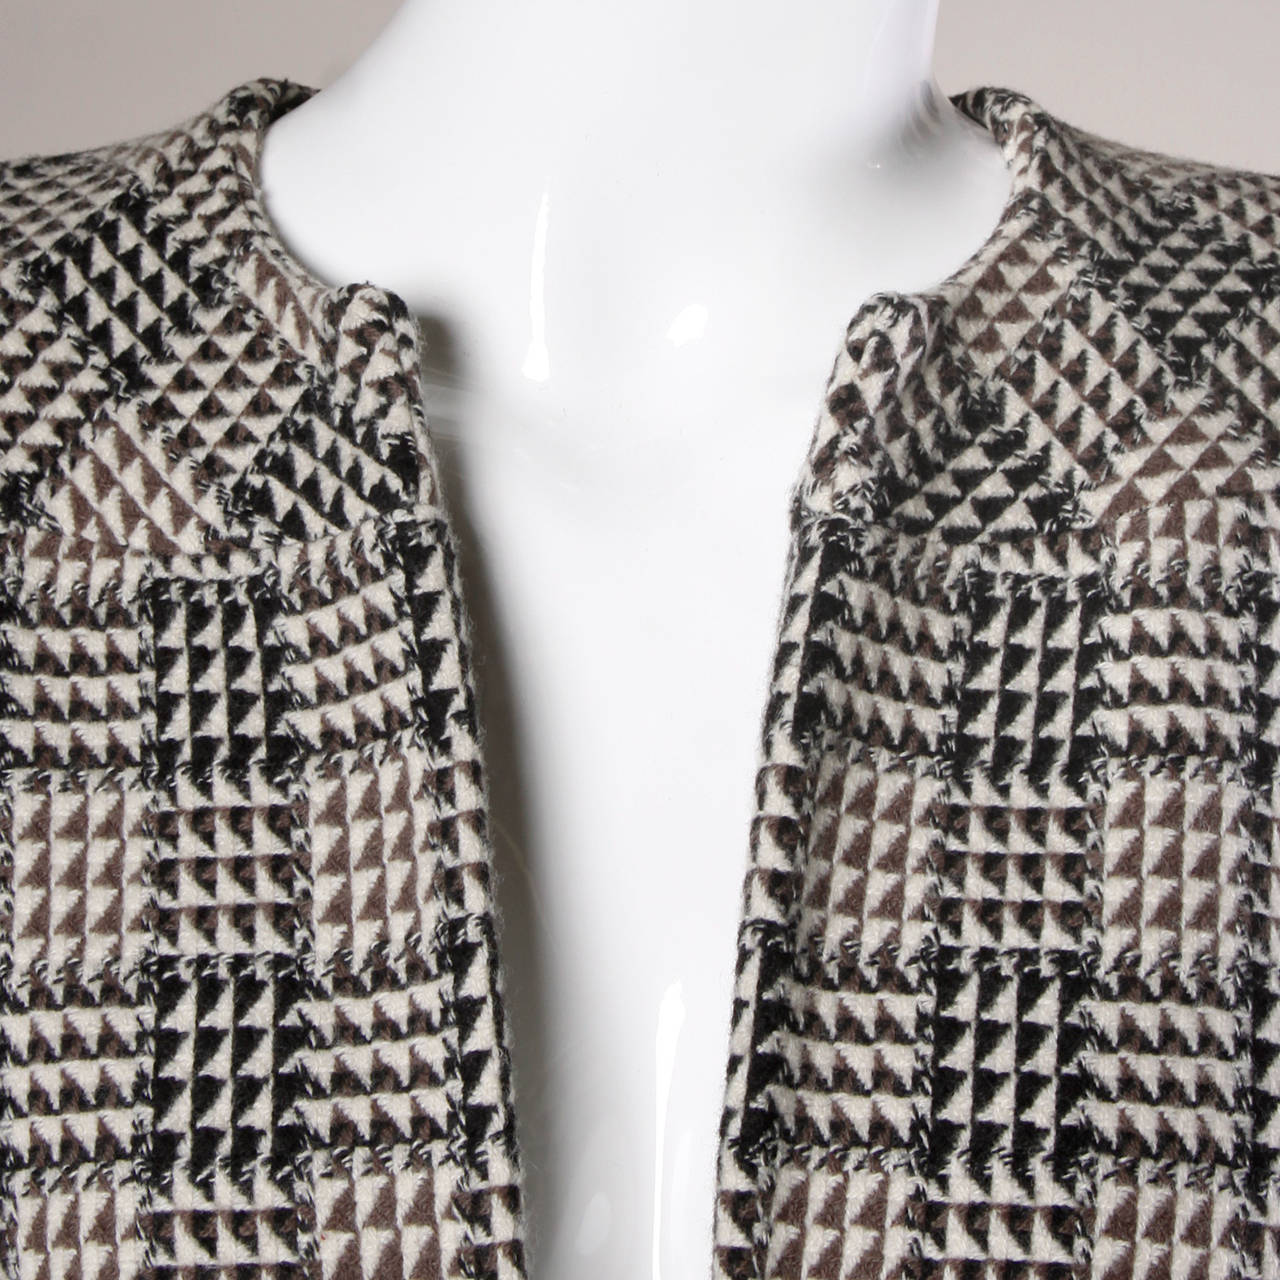 Woven Carolina Herrera wool blazer with a triangular design and bold shoulders.

Details:

Fully Lined
Shoulder Pads Are Sewn Into Lining
No Closure
Marked Size: 6
Estimated Size: Small
Color: Dark Gray/ Ivory/ Black
Fabric: 100%